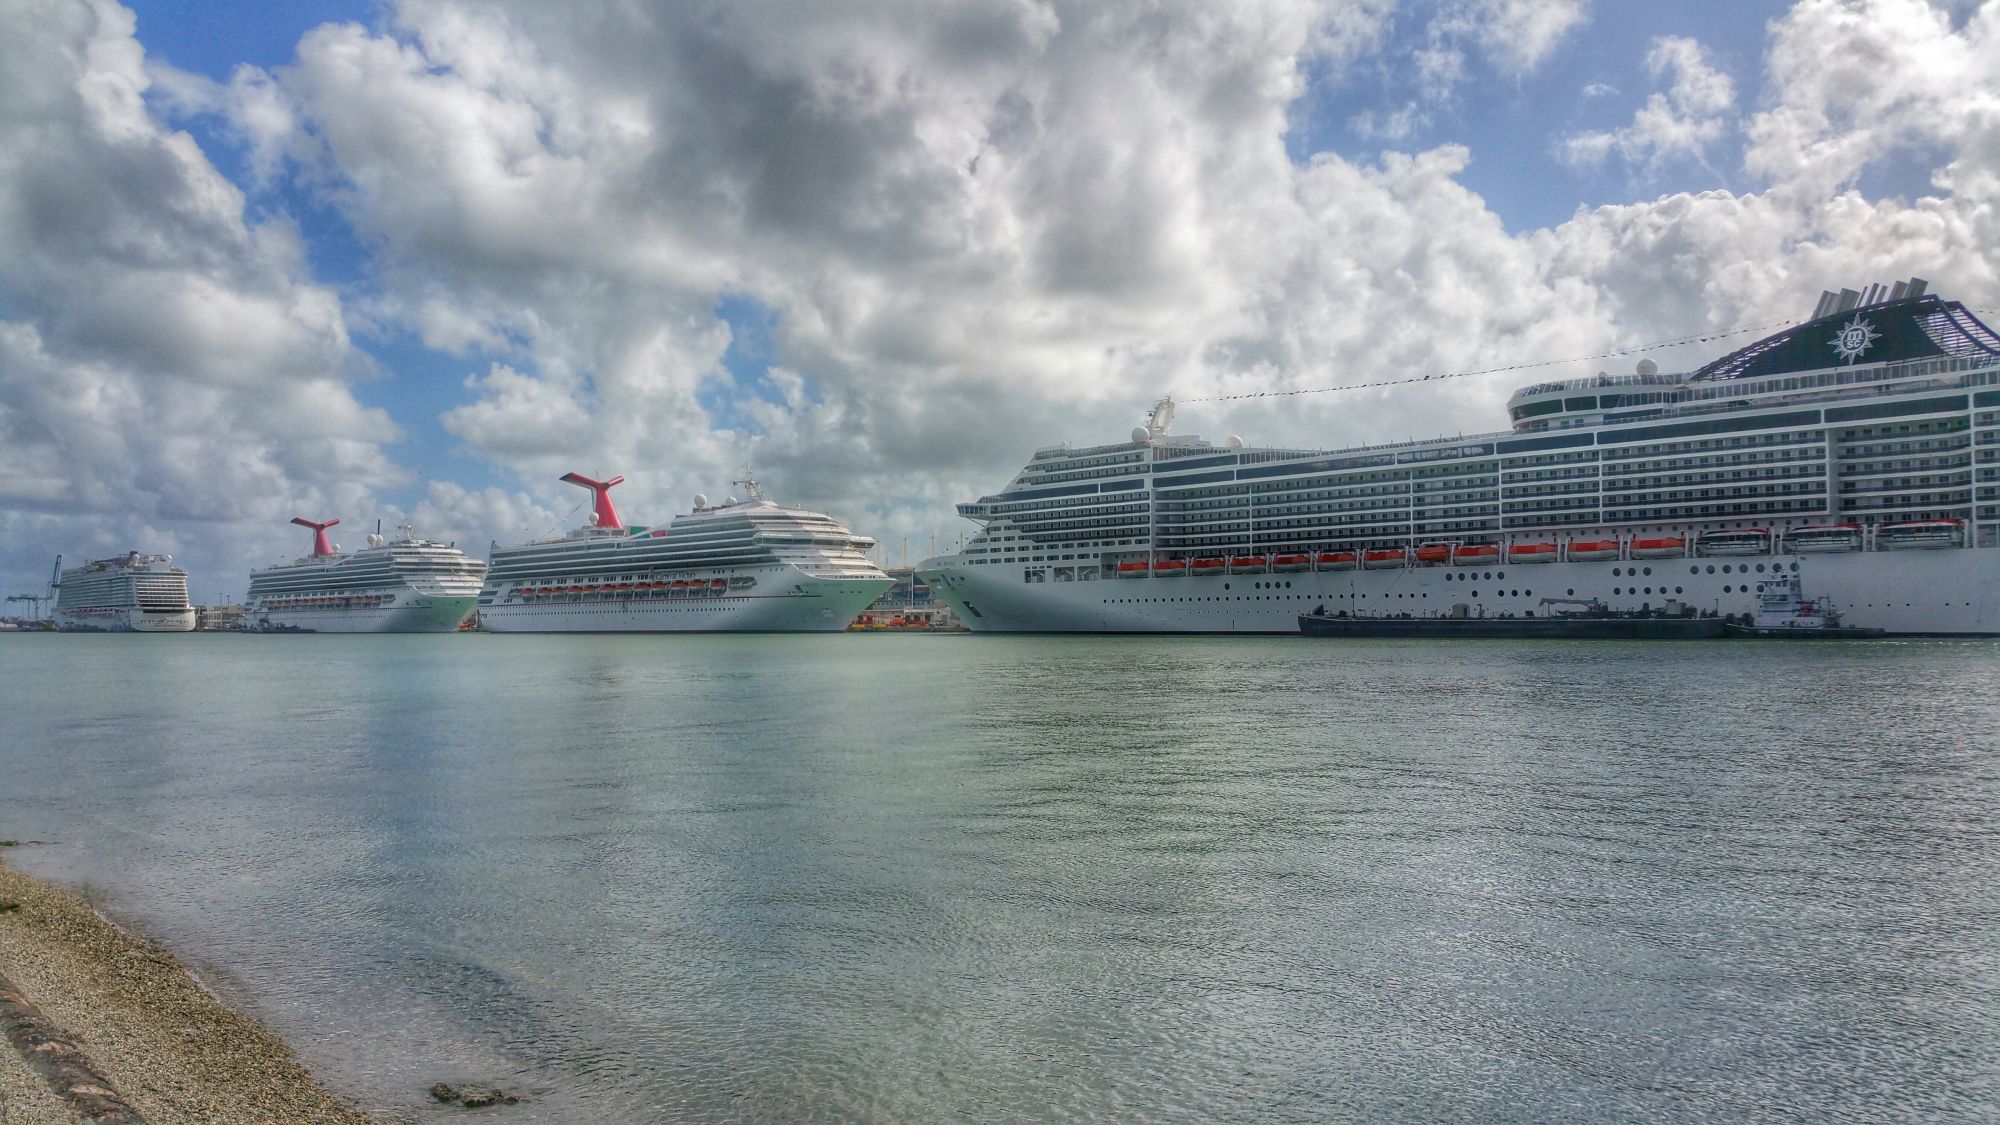 Miami: Best spots to watch Cruise Ships - Gate to Adventures